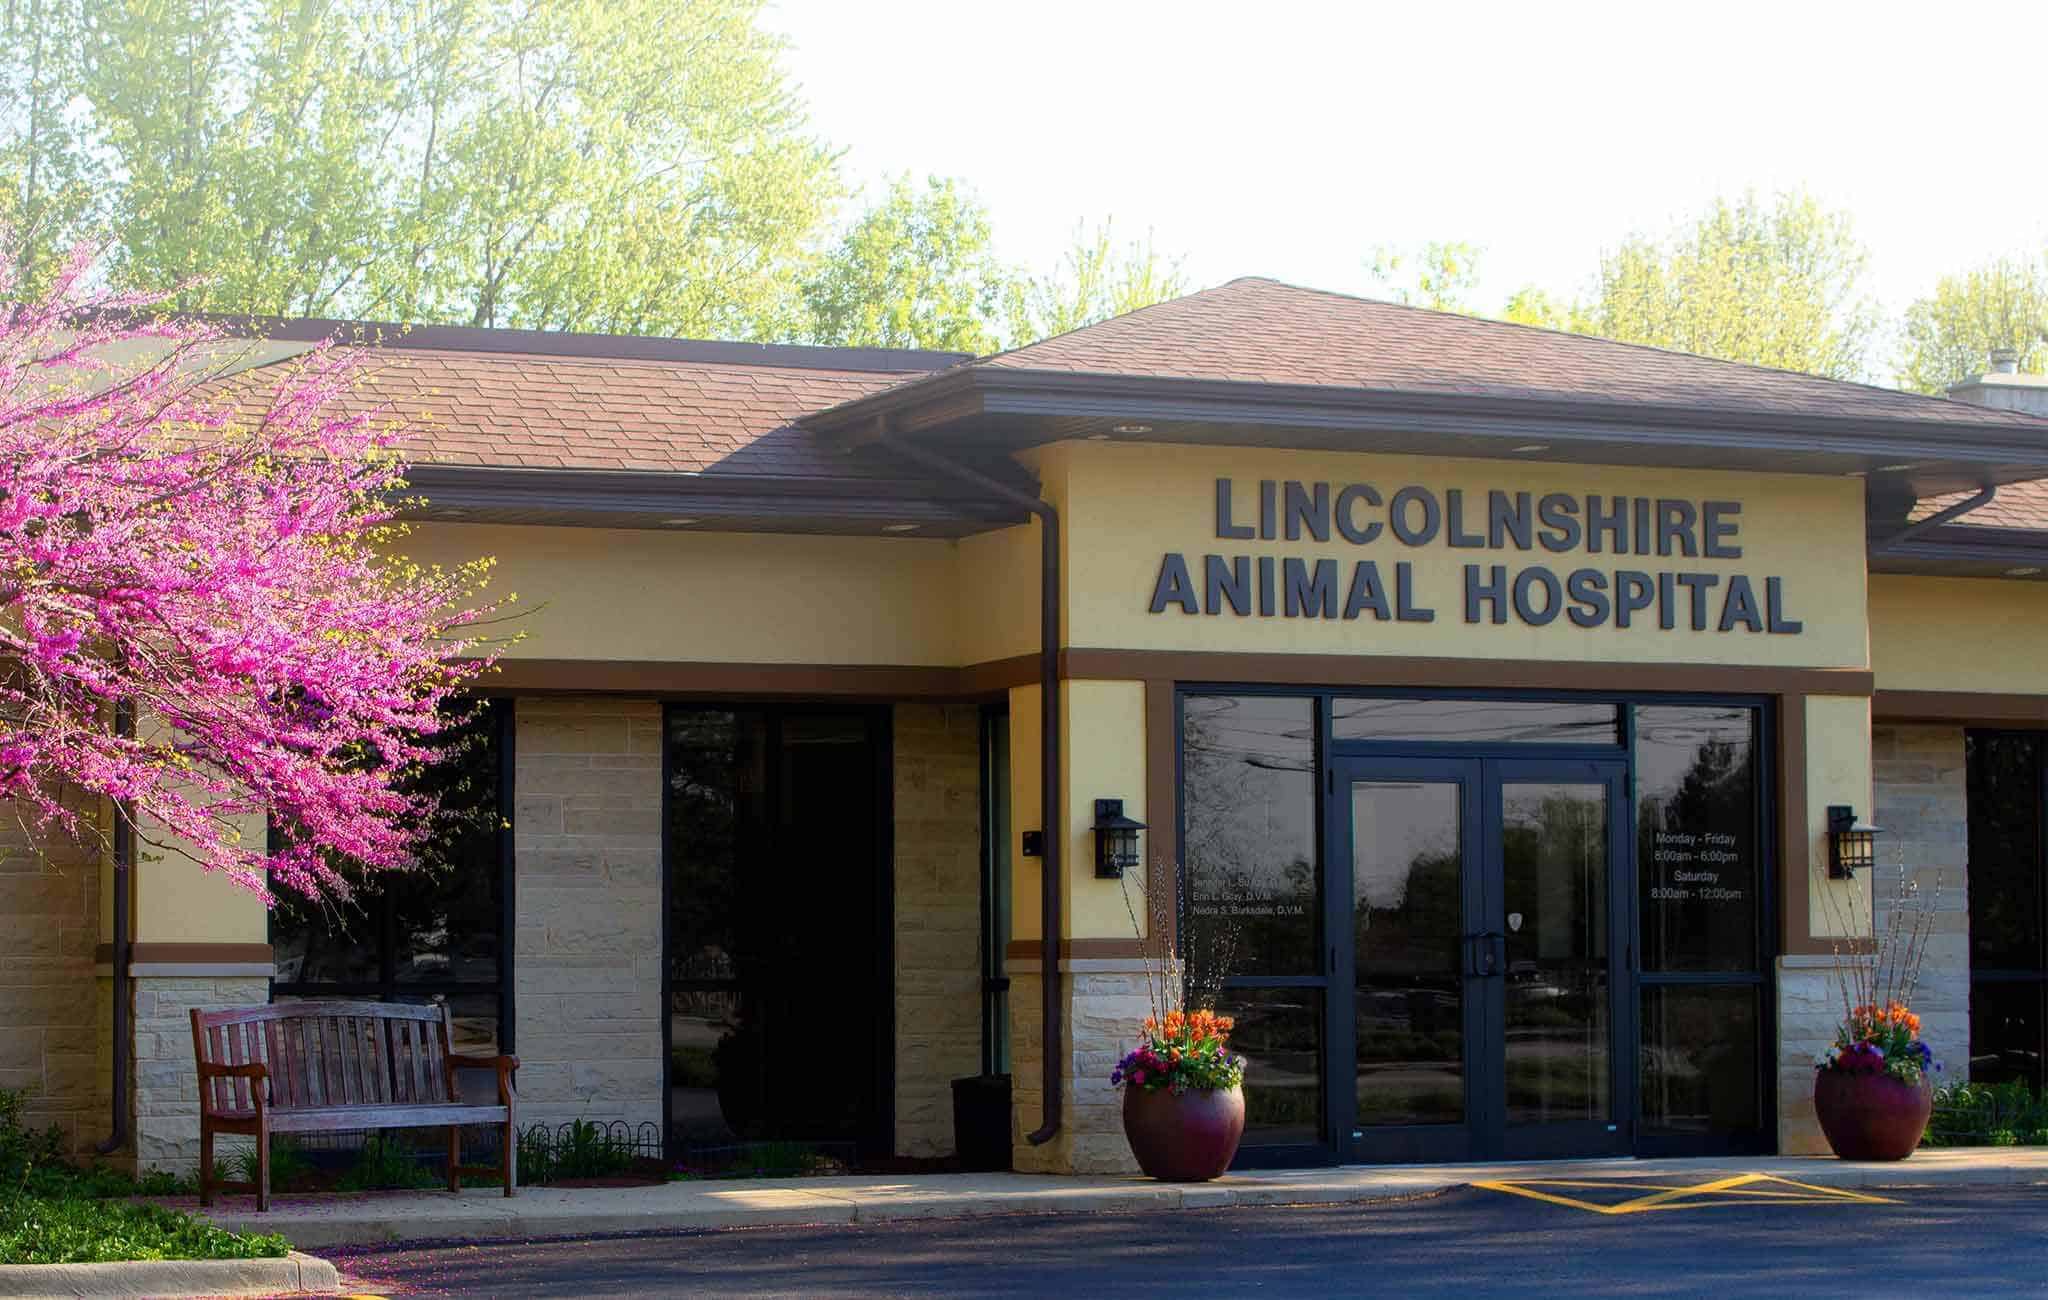 About Lincolnshire Animal Hospital